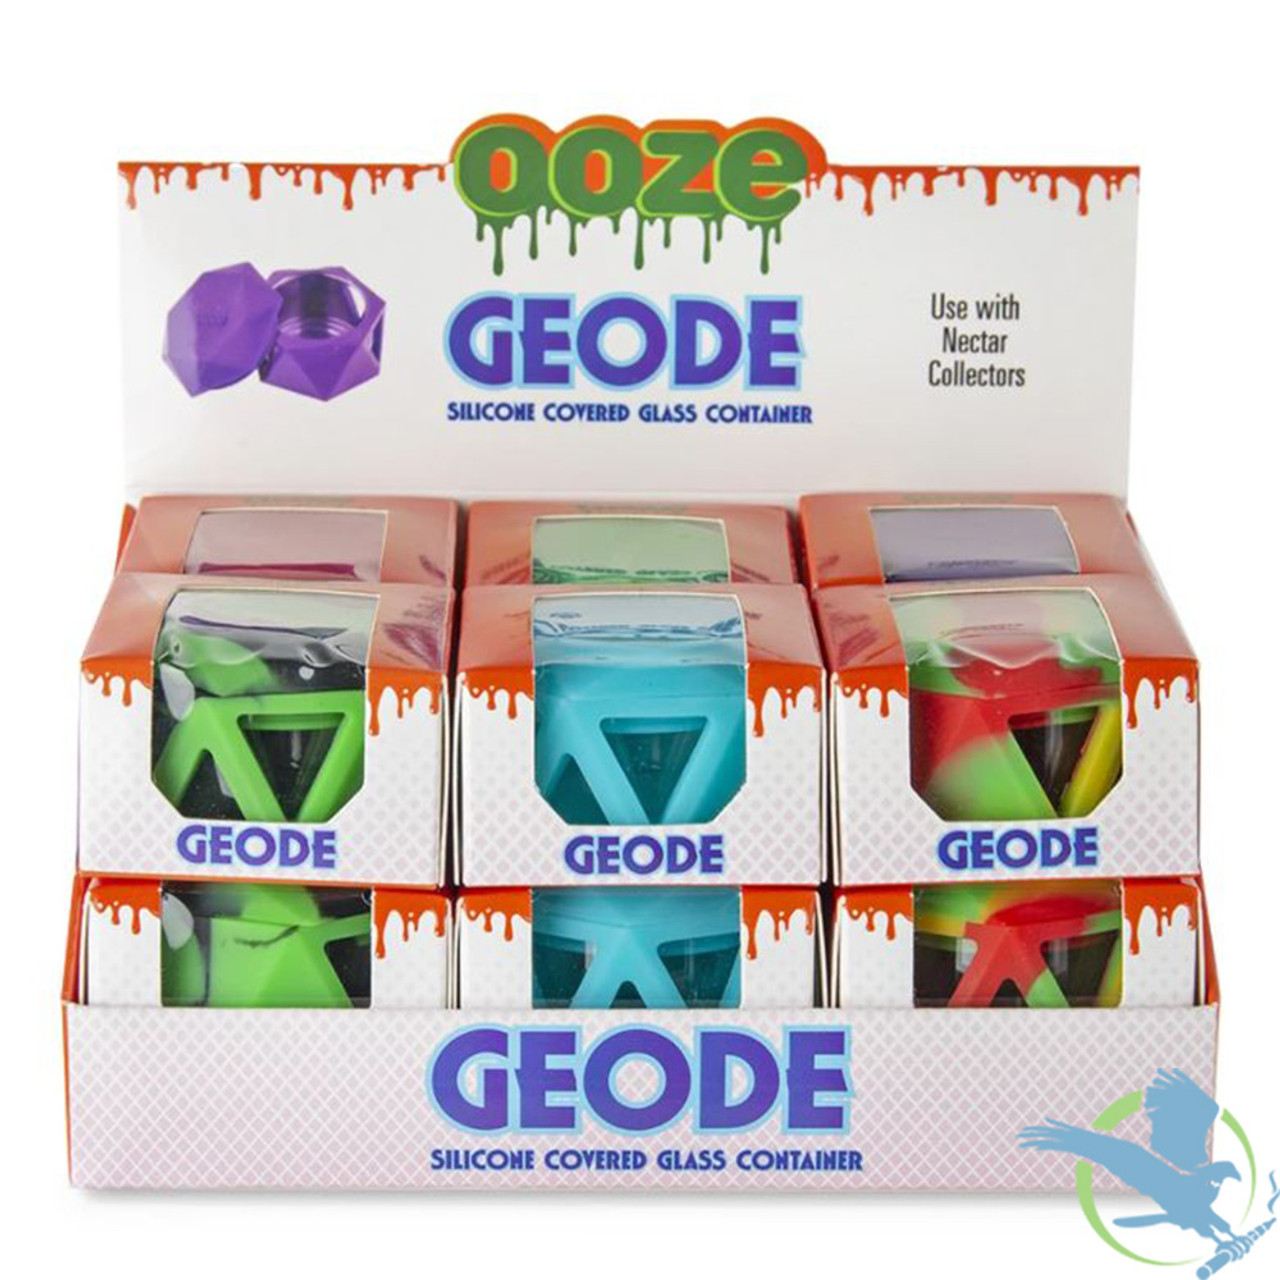 OOZE Hot Box Silicone Container - 40 Count Per Jar — MJ Wholesale